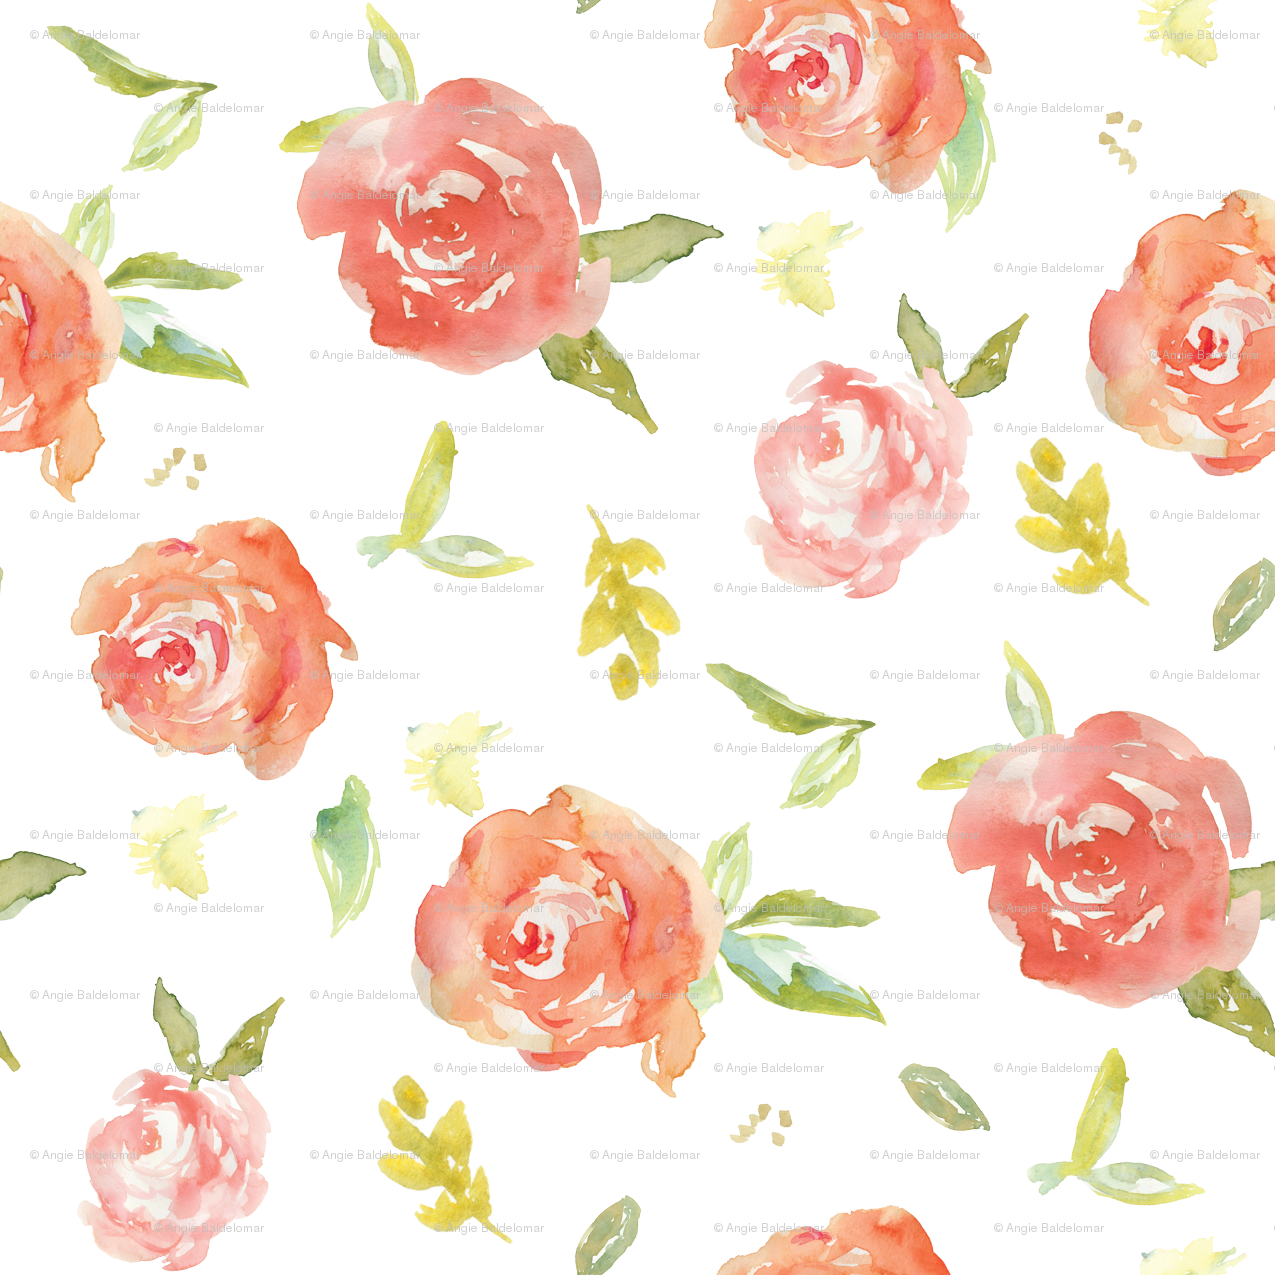 peonies clipart coral peony